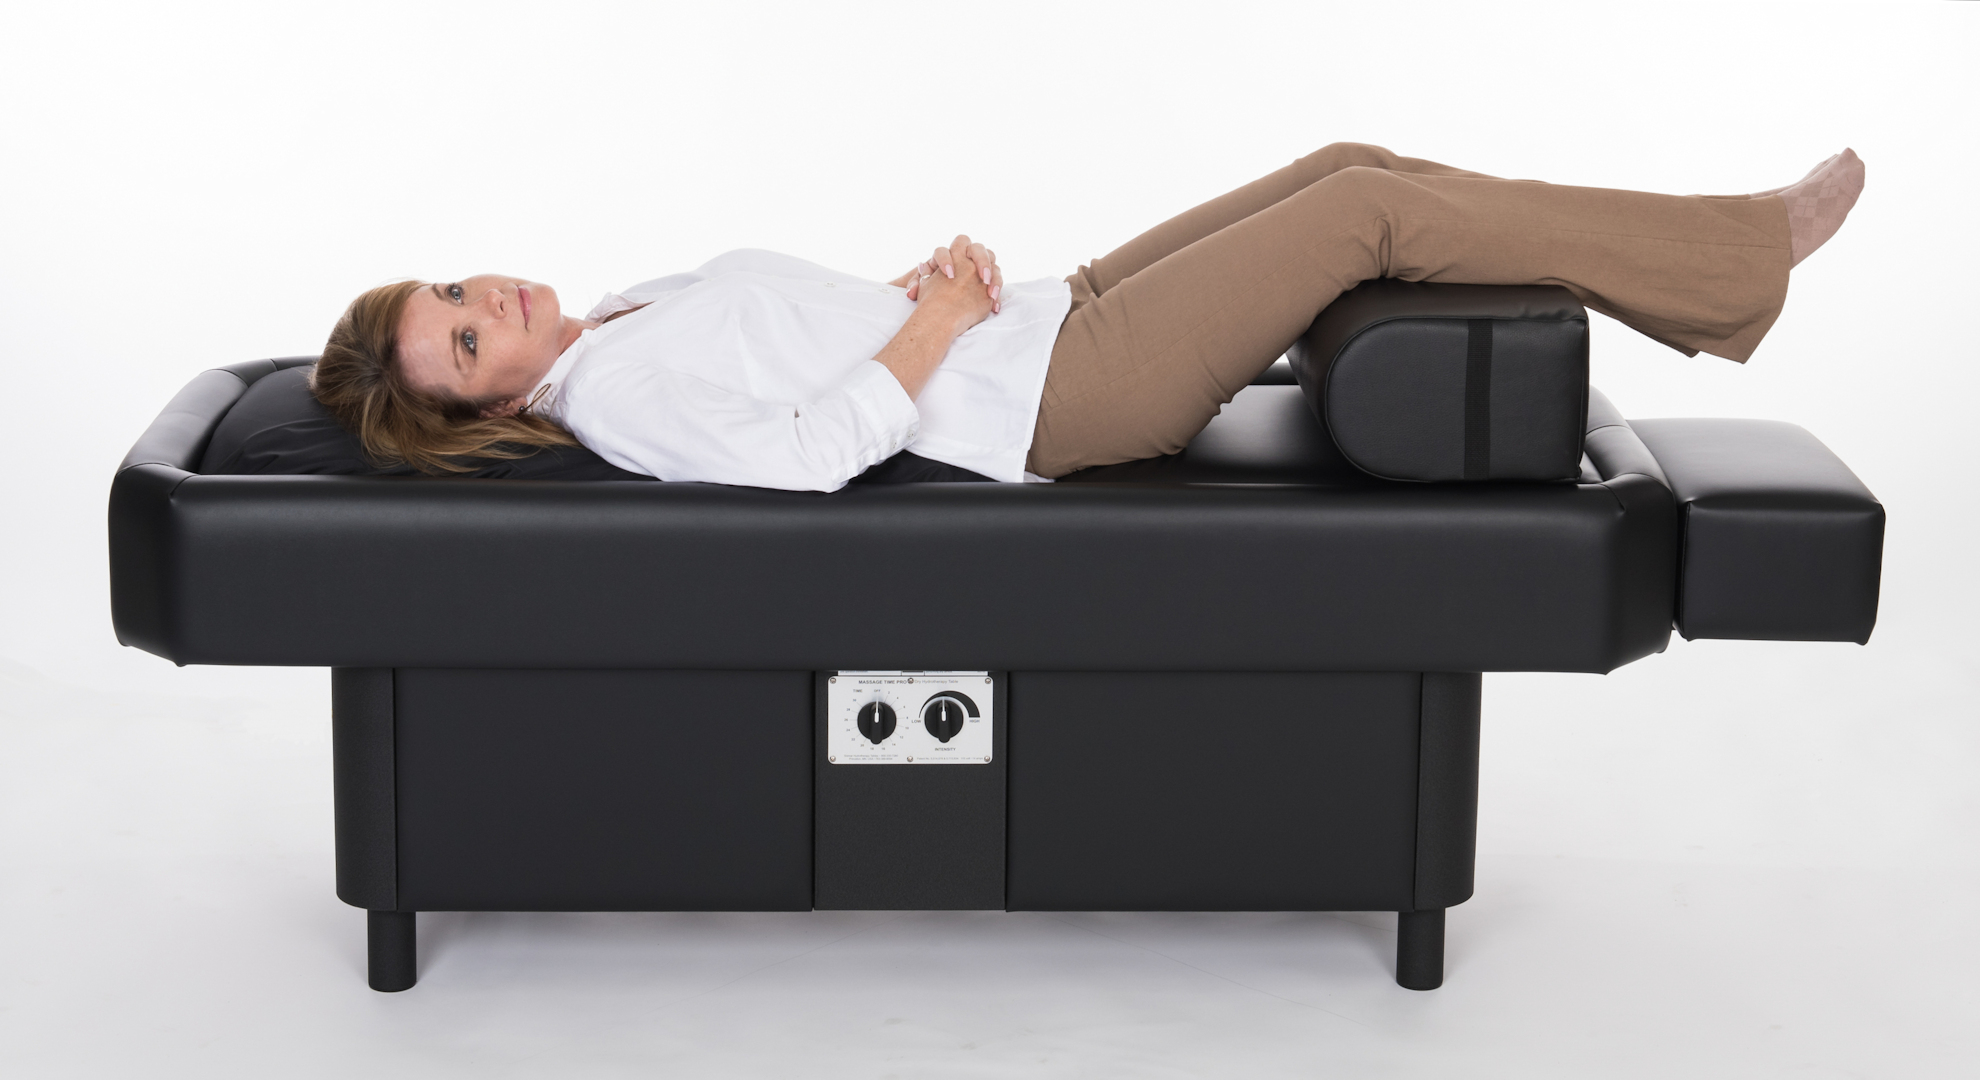 Peak Style Positioning Bolster  Support Under Legs, Arms & Body